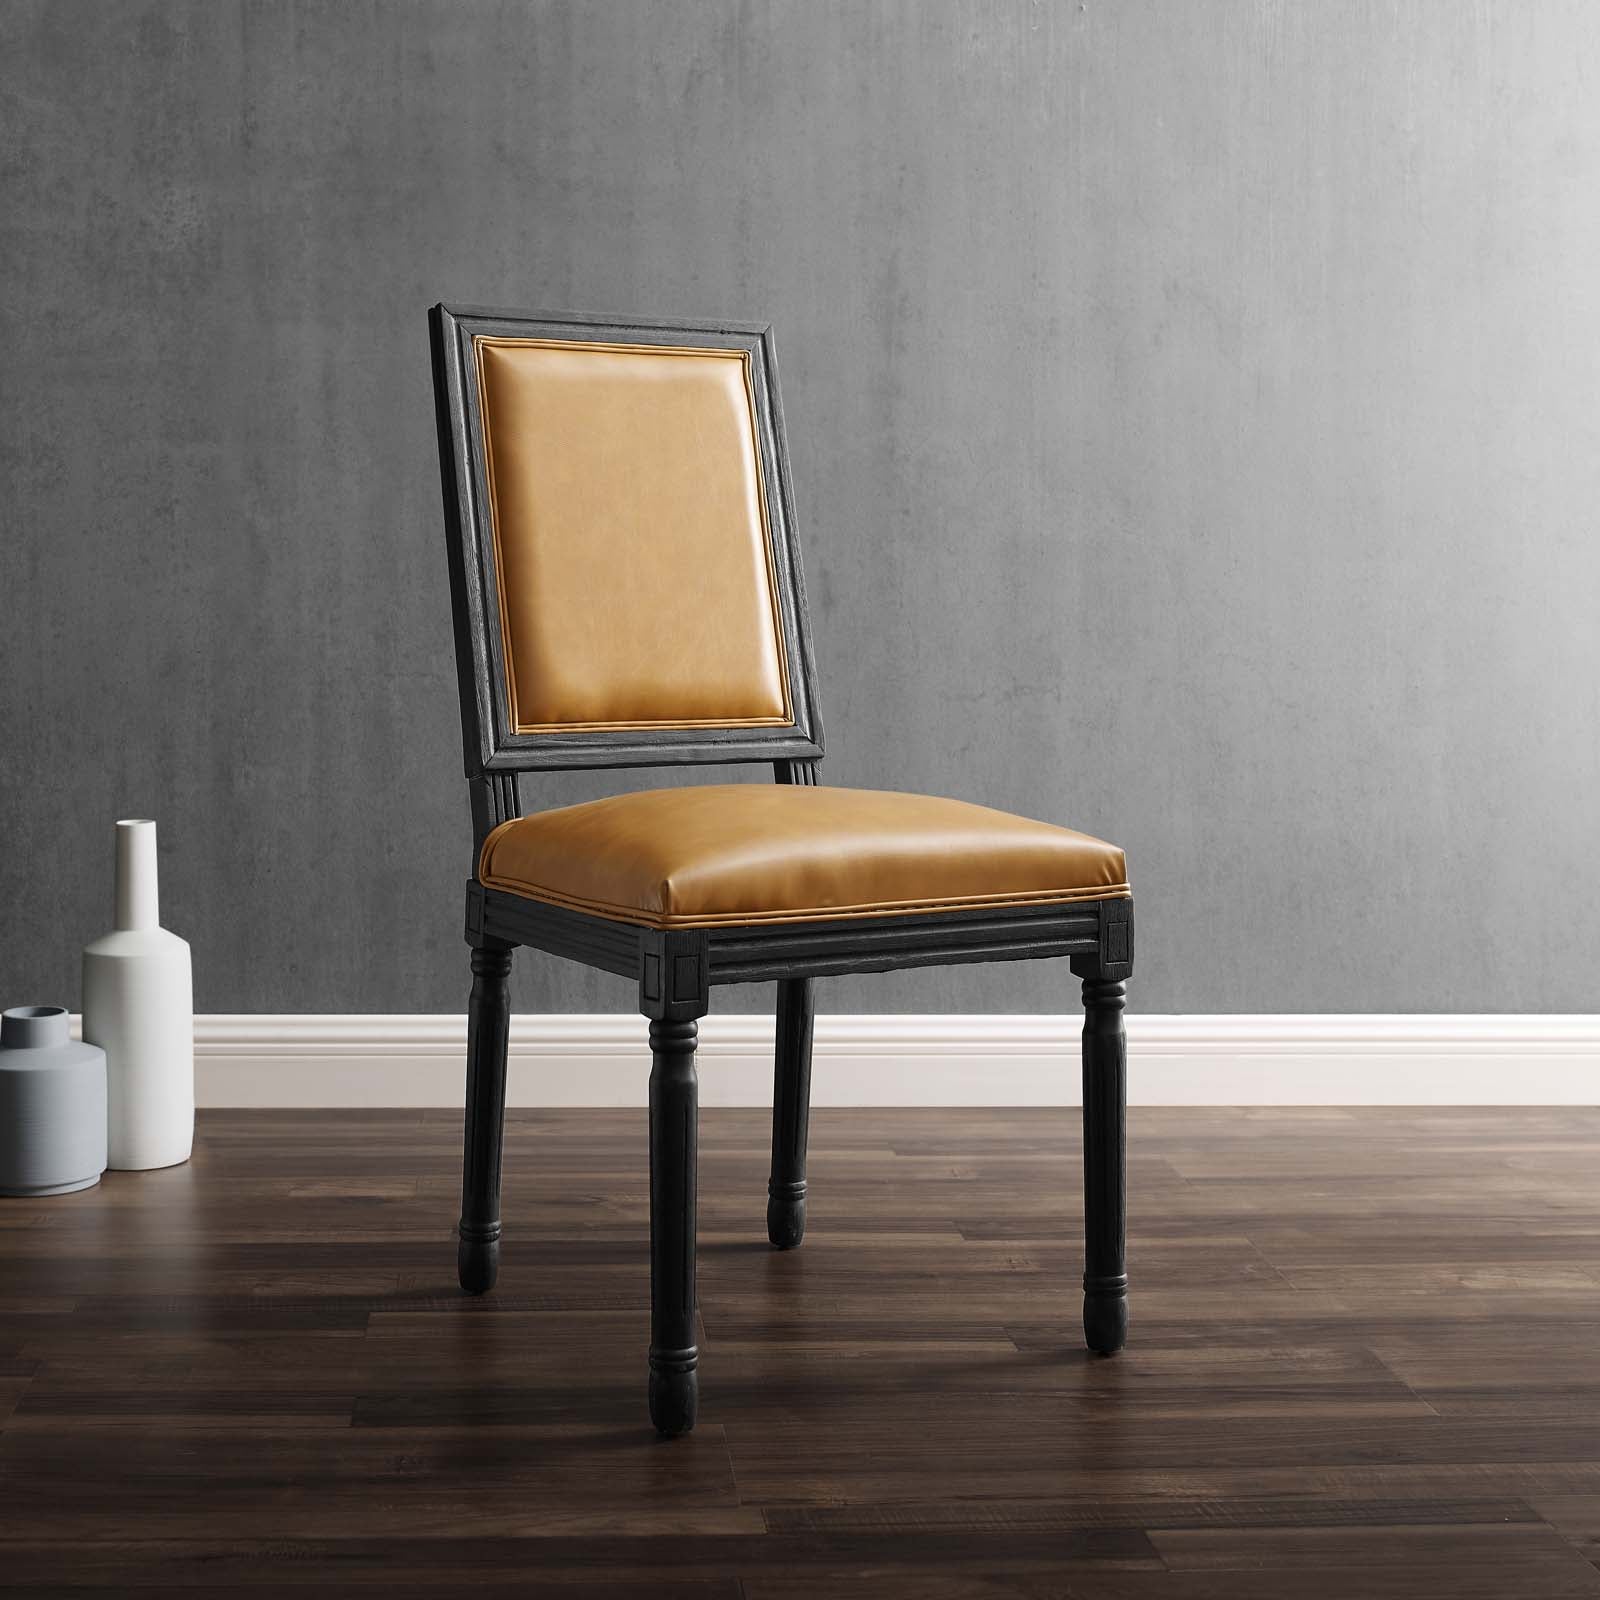 Court French Vintage Vegan Leather Dining Side Chair - East Shore Modern Home Furnishings